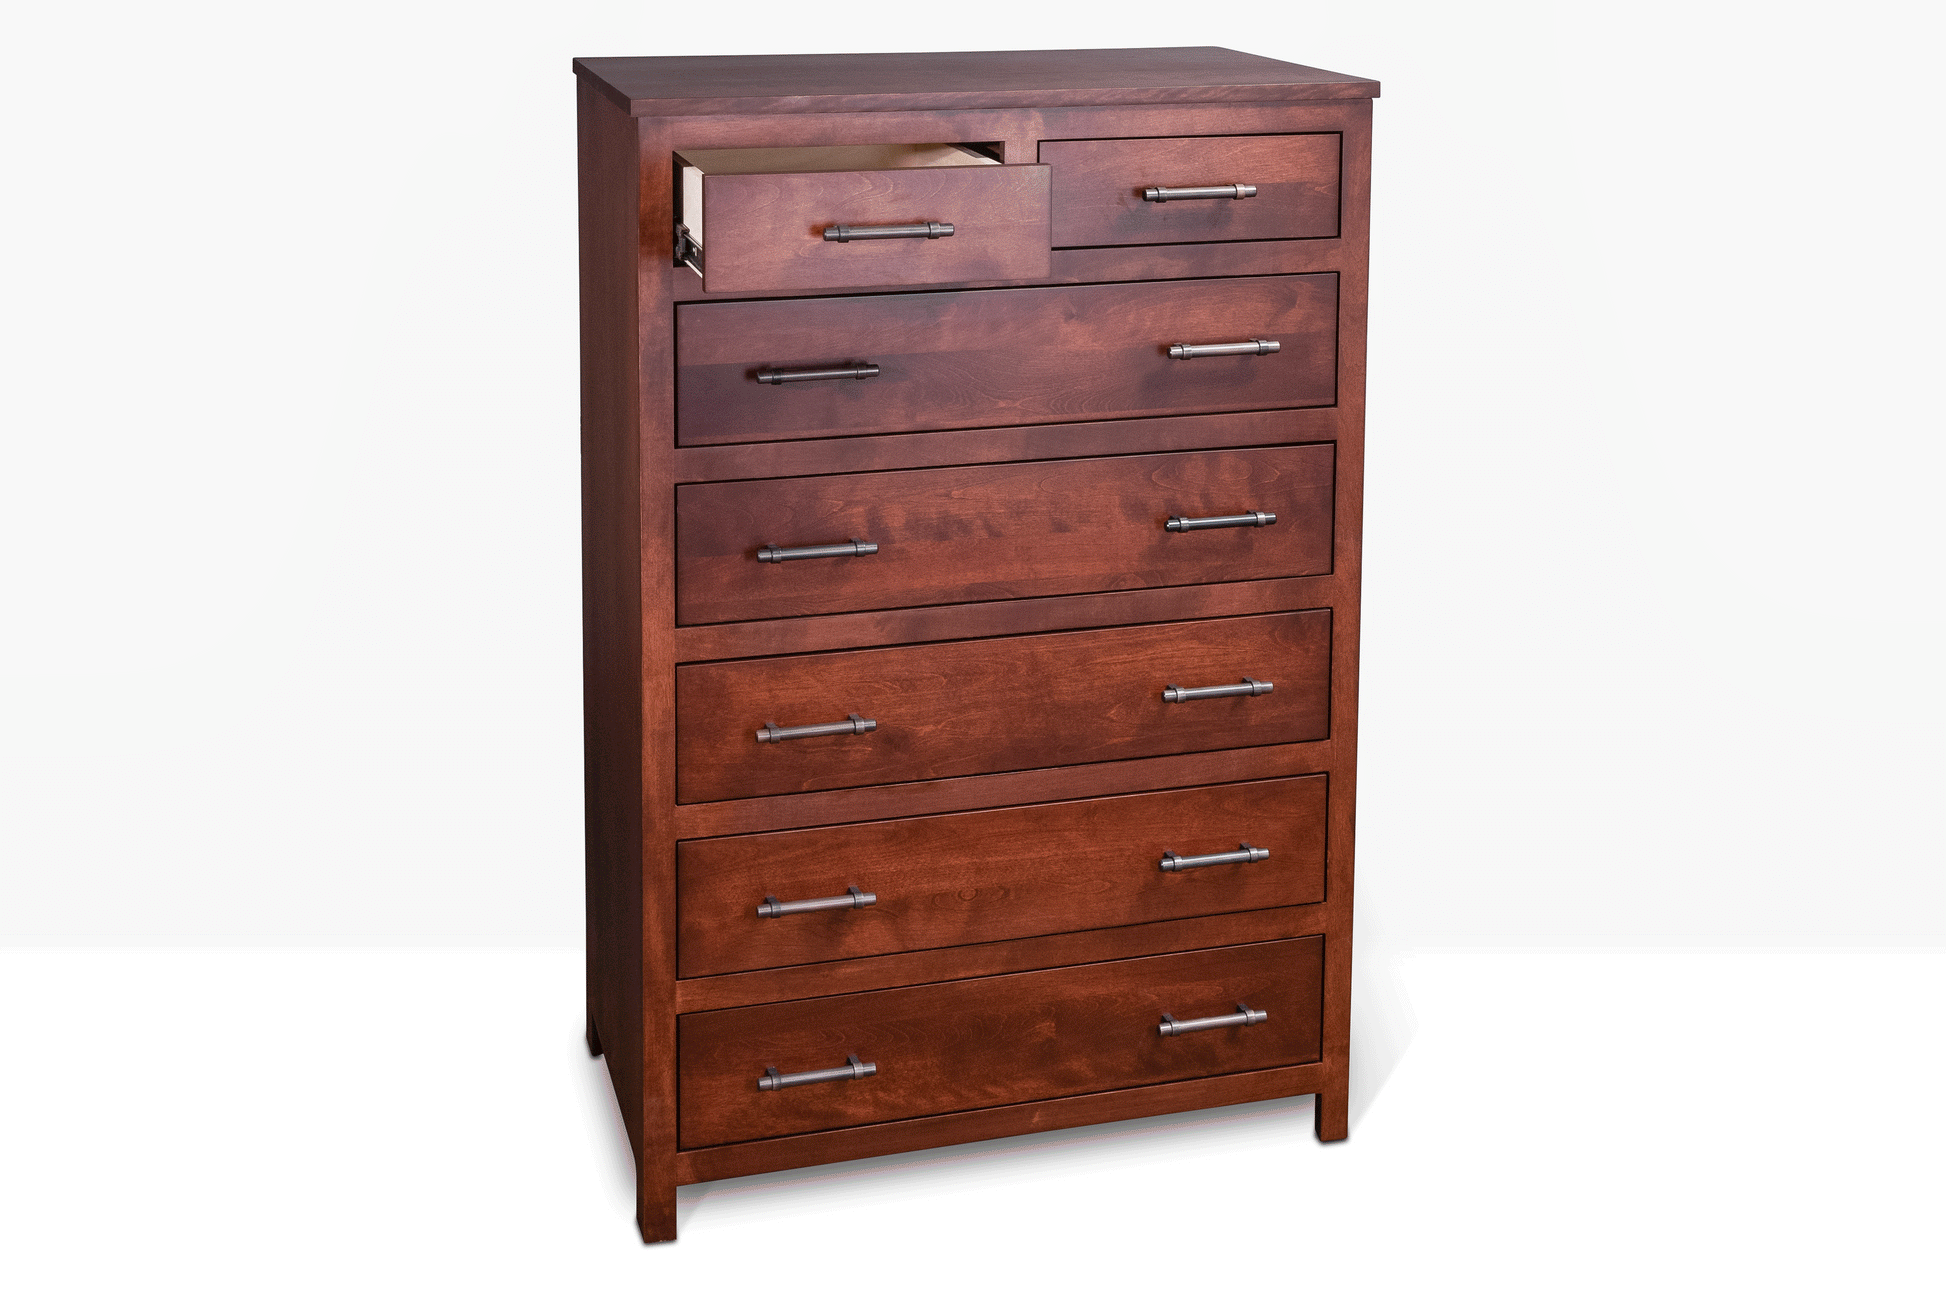 Acadia Tremont Chest with Split Top Drawer, shown in cherry finish with drawers open to highlight storage space.